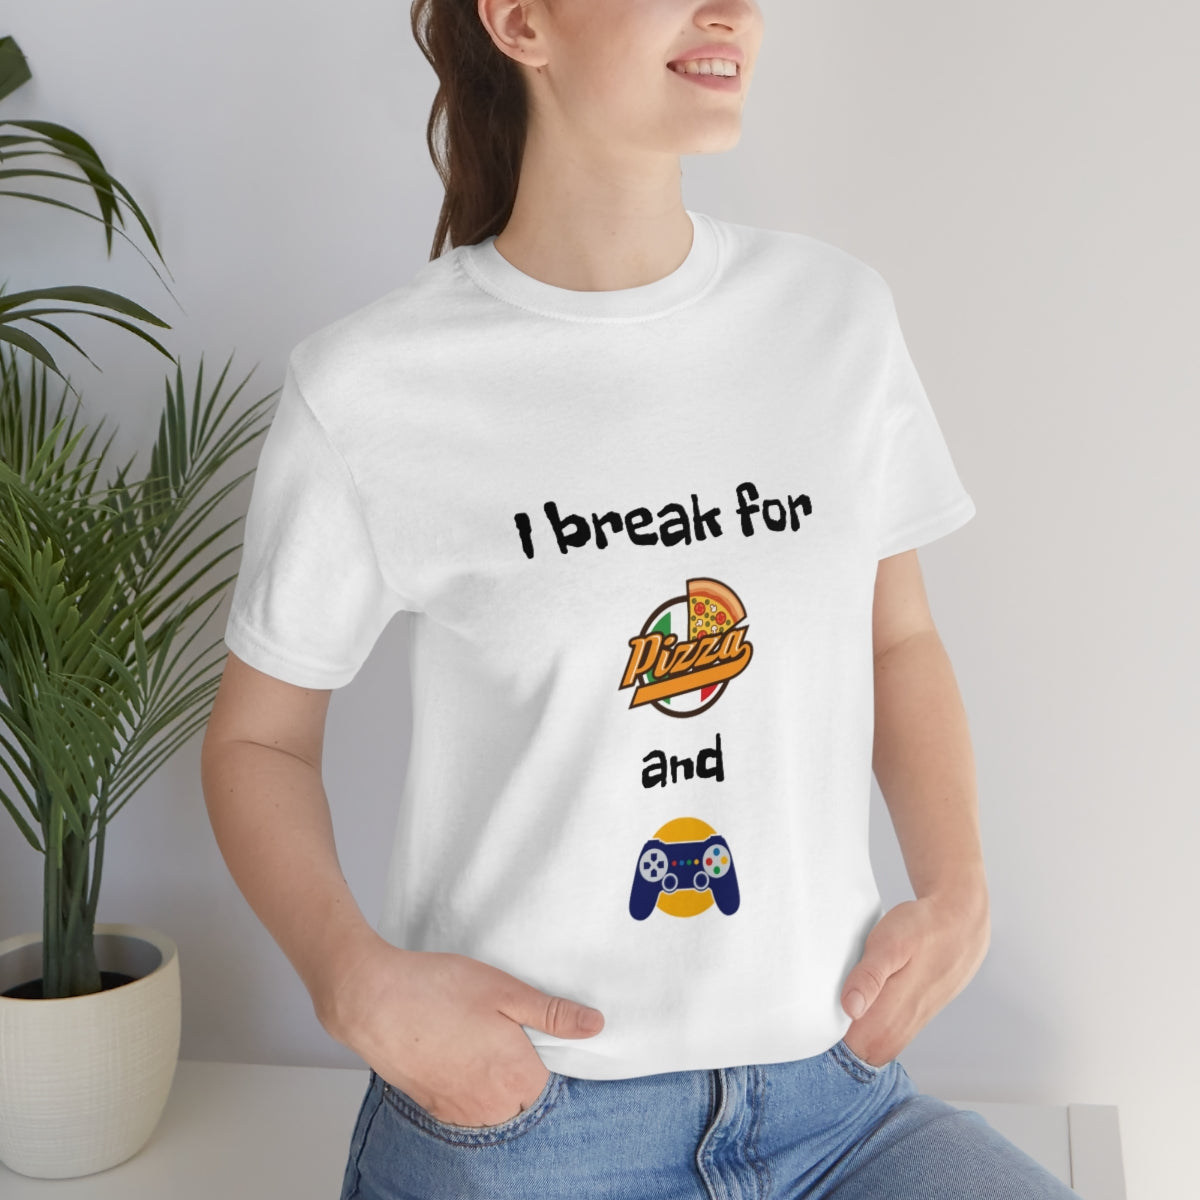 I break for pizza and videogames - Funny Unisex Short Sleeve Tee